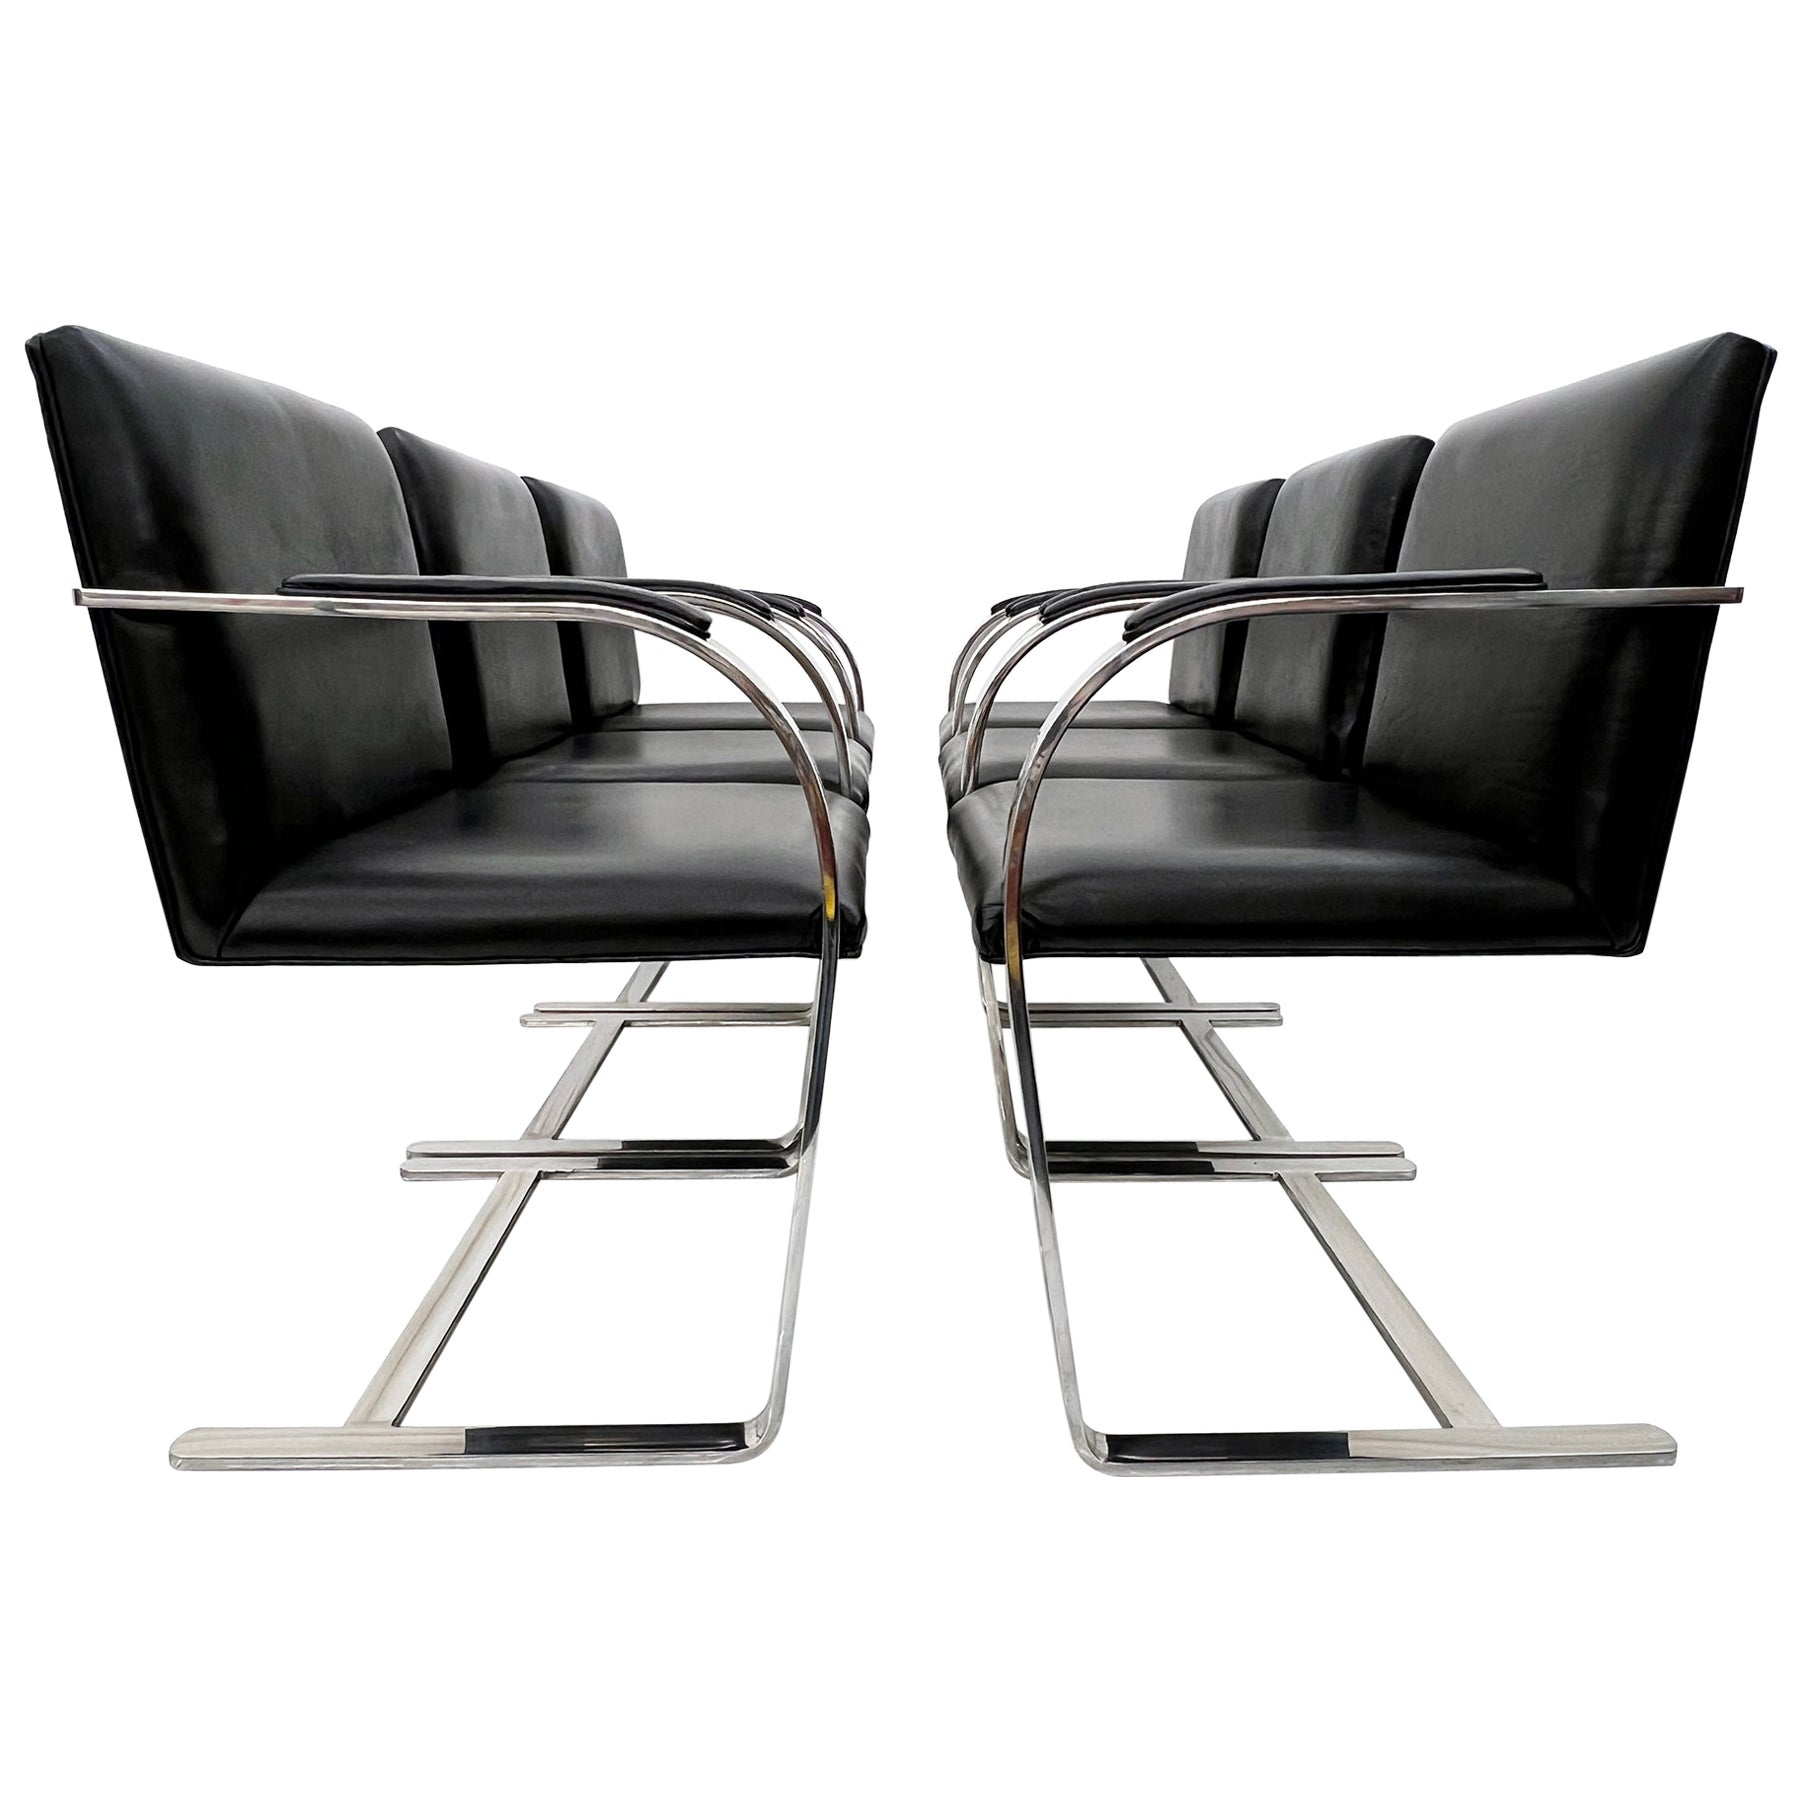 Set of 6 Ludwig Mies van der Rohe Brno Chairs in Black Leather, Knoll For Sale